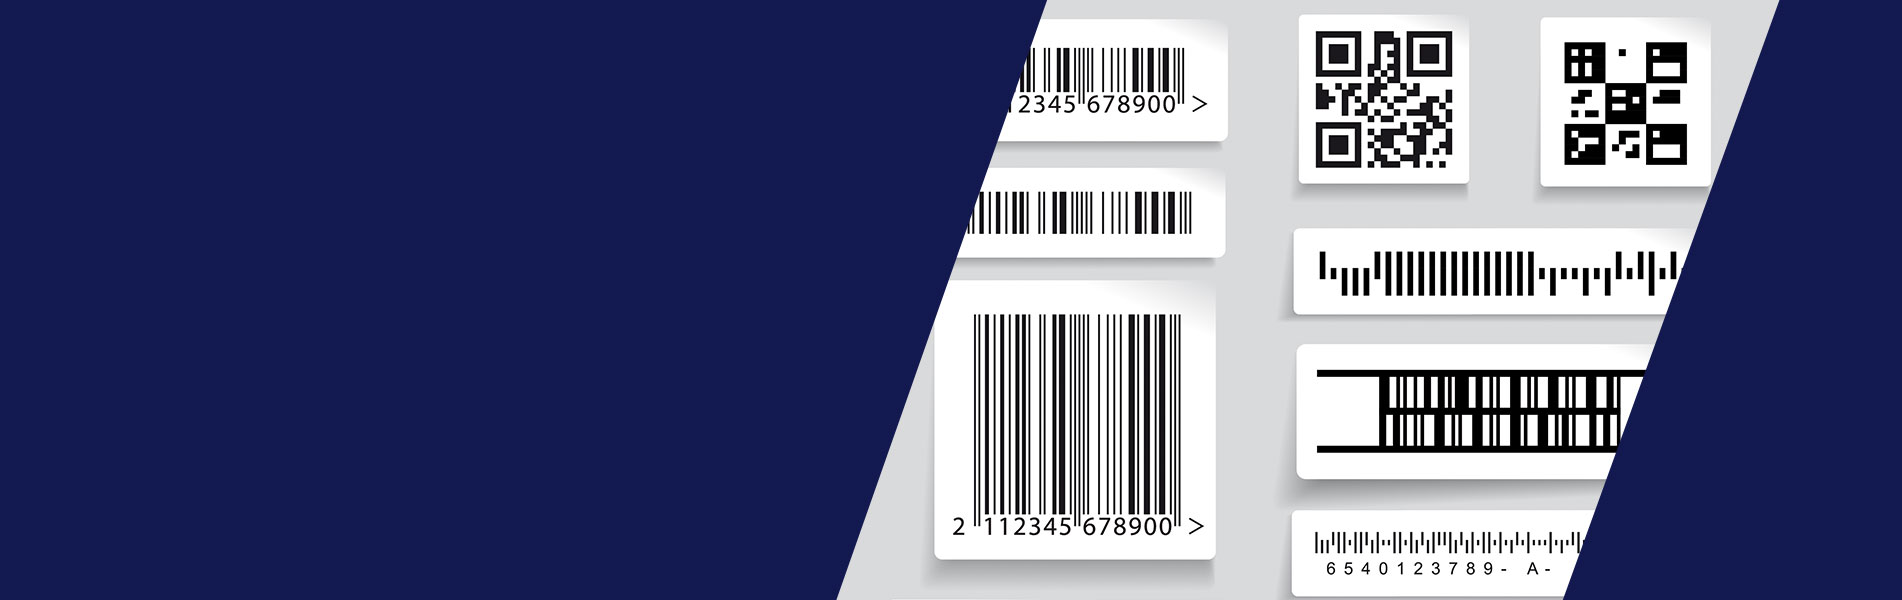 Using Variable Barcode - Acro Labels